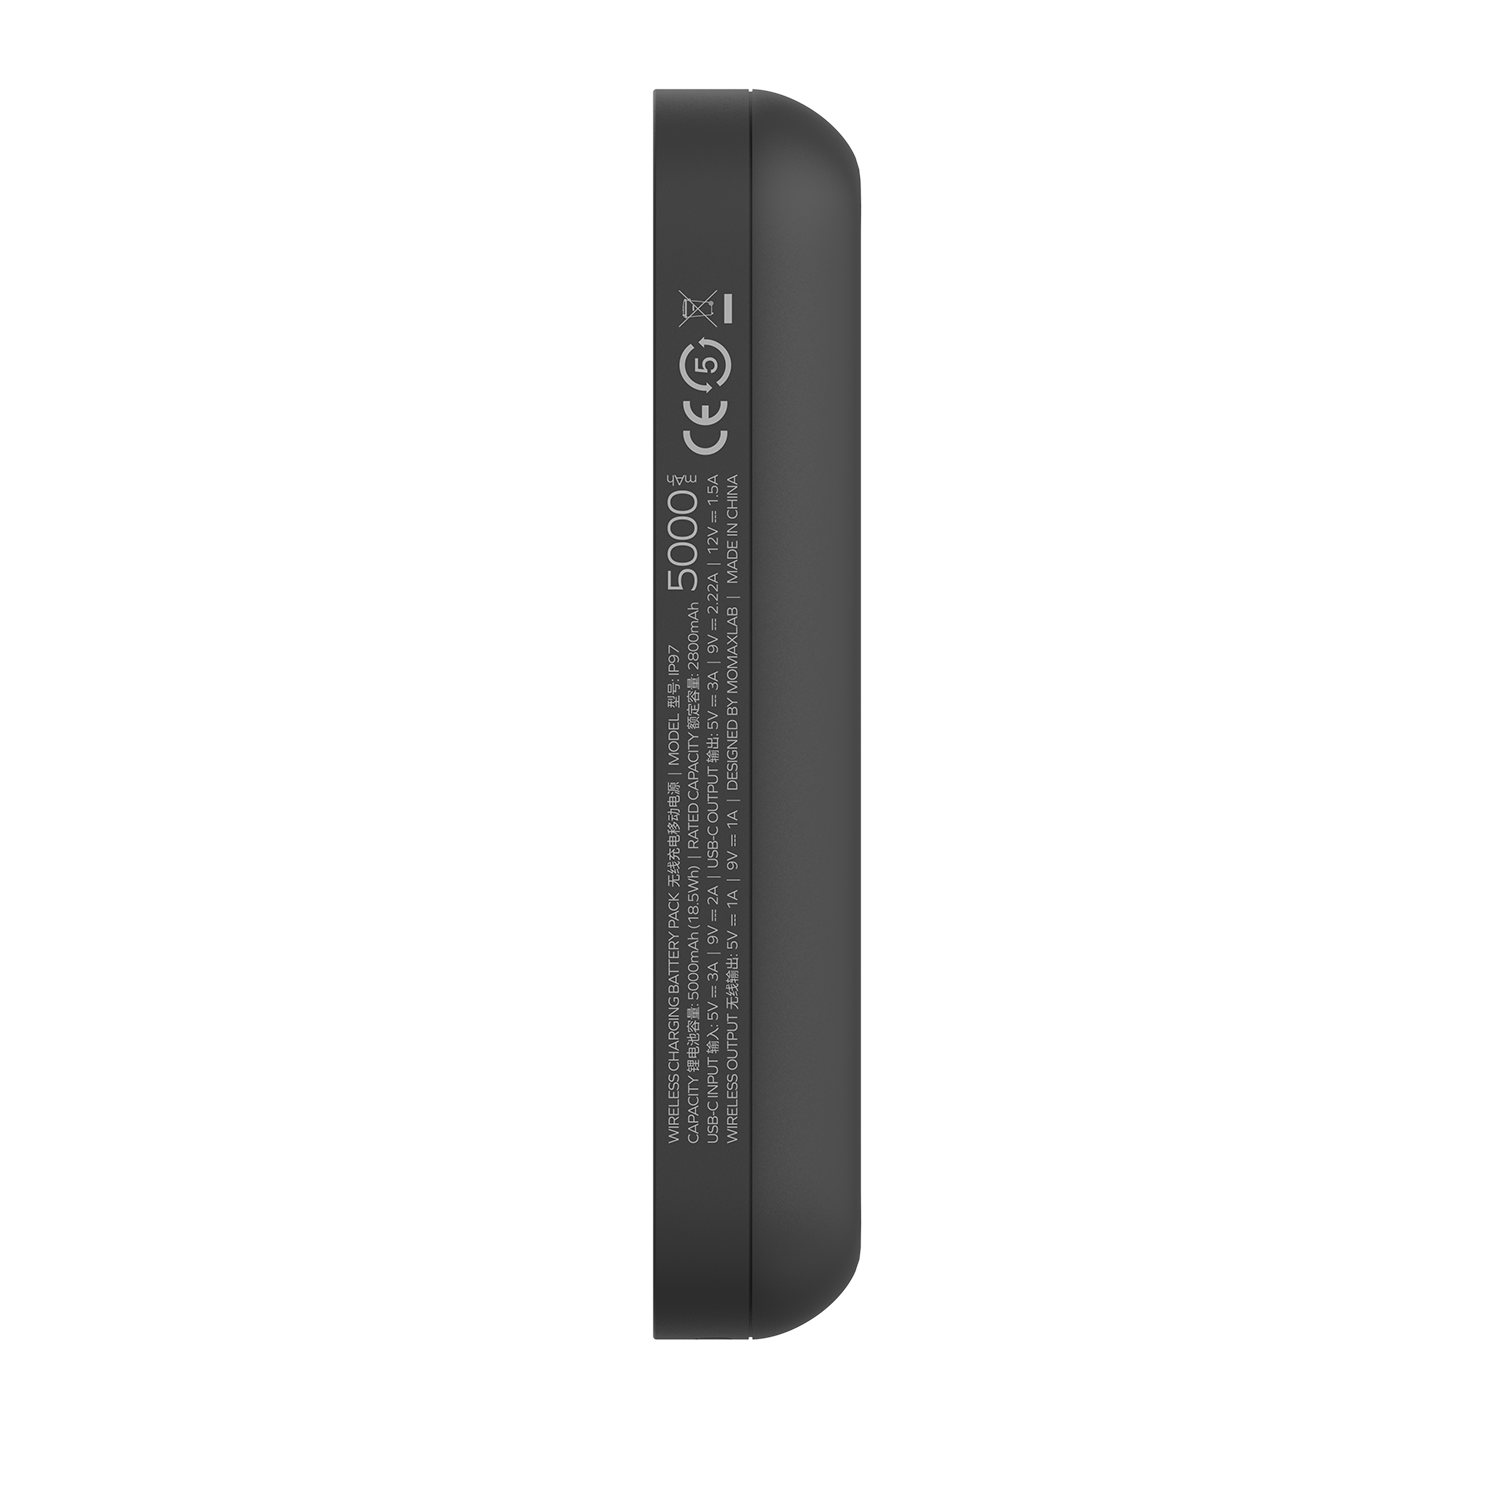 Momax Q.MAG Power Magnetic Wireless Battery Pack MagSafe Power Bank 5000mAh - Black - TECH STREET